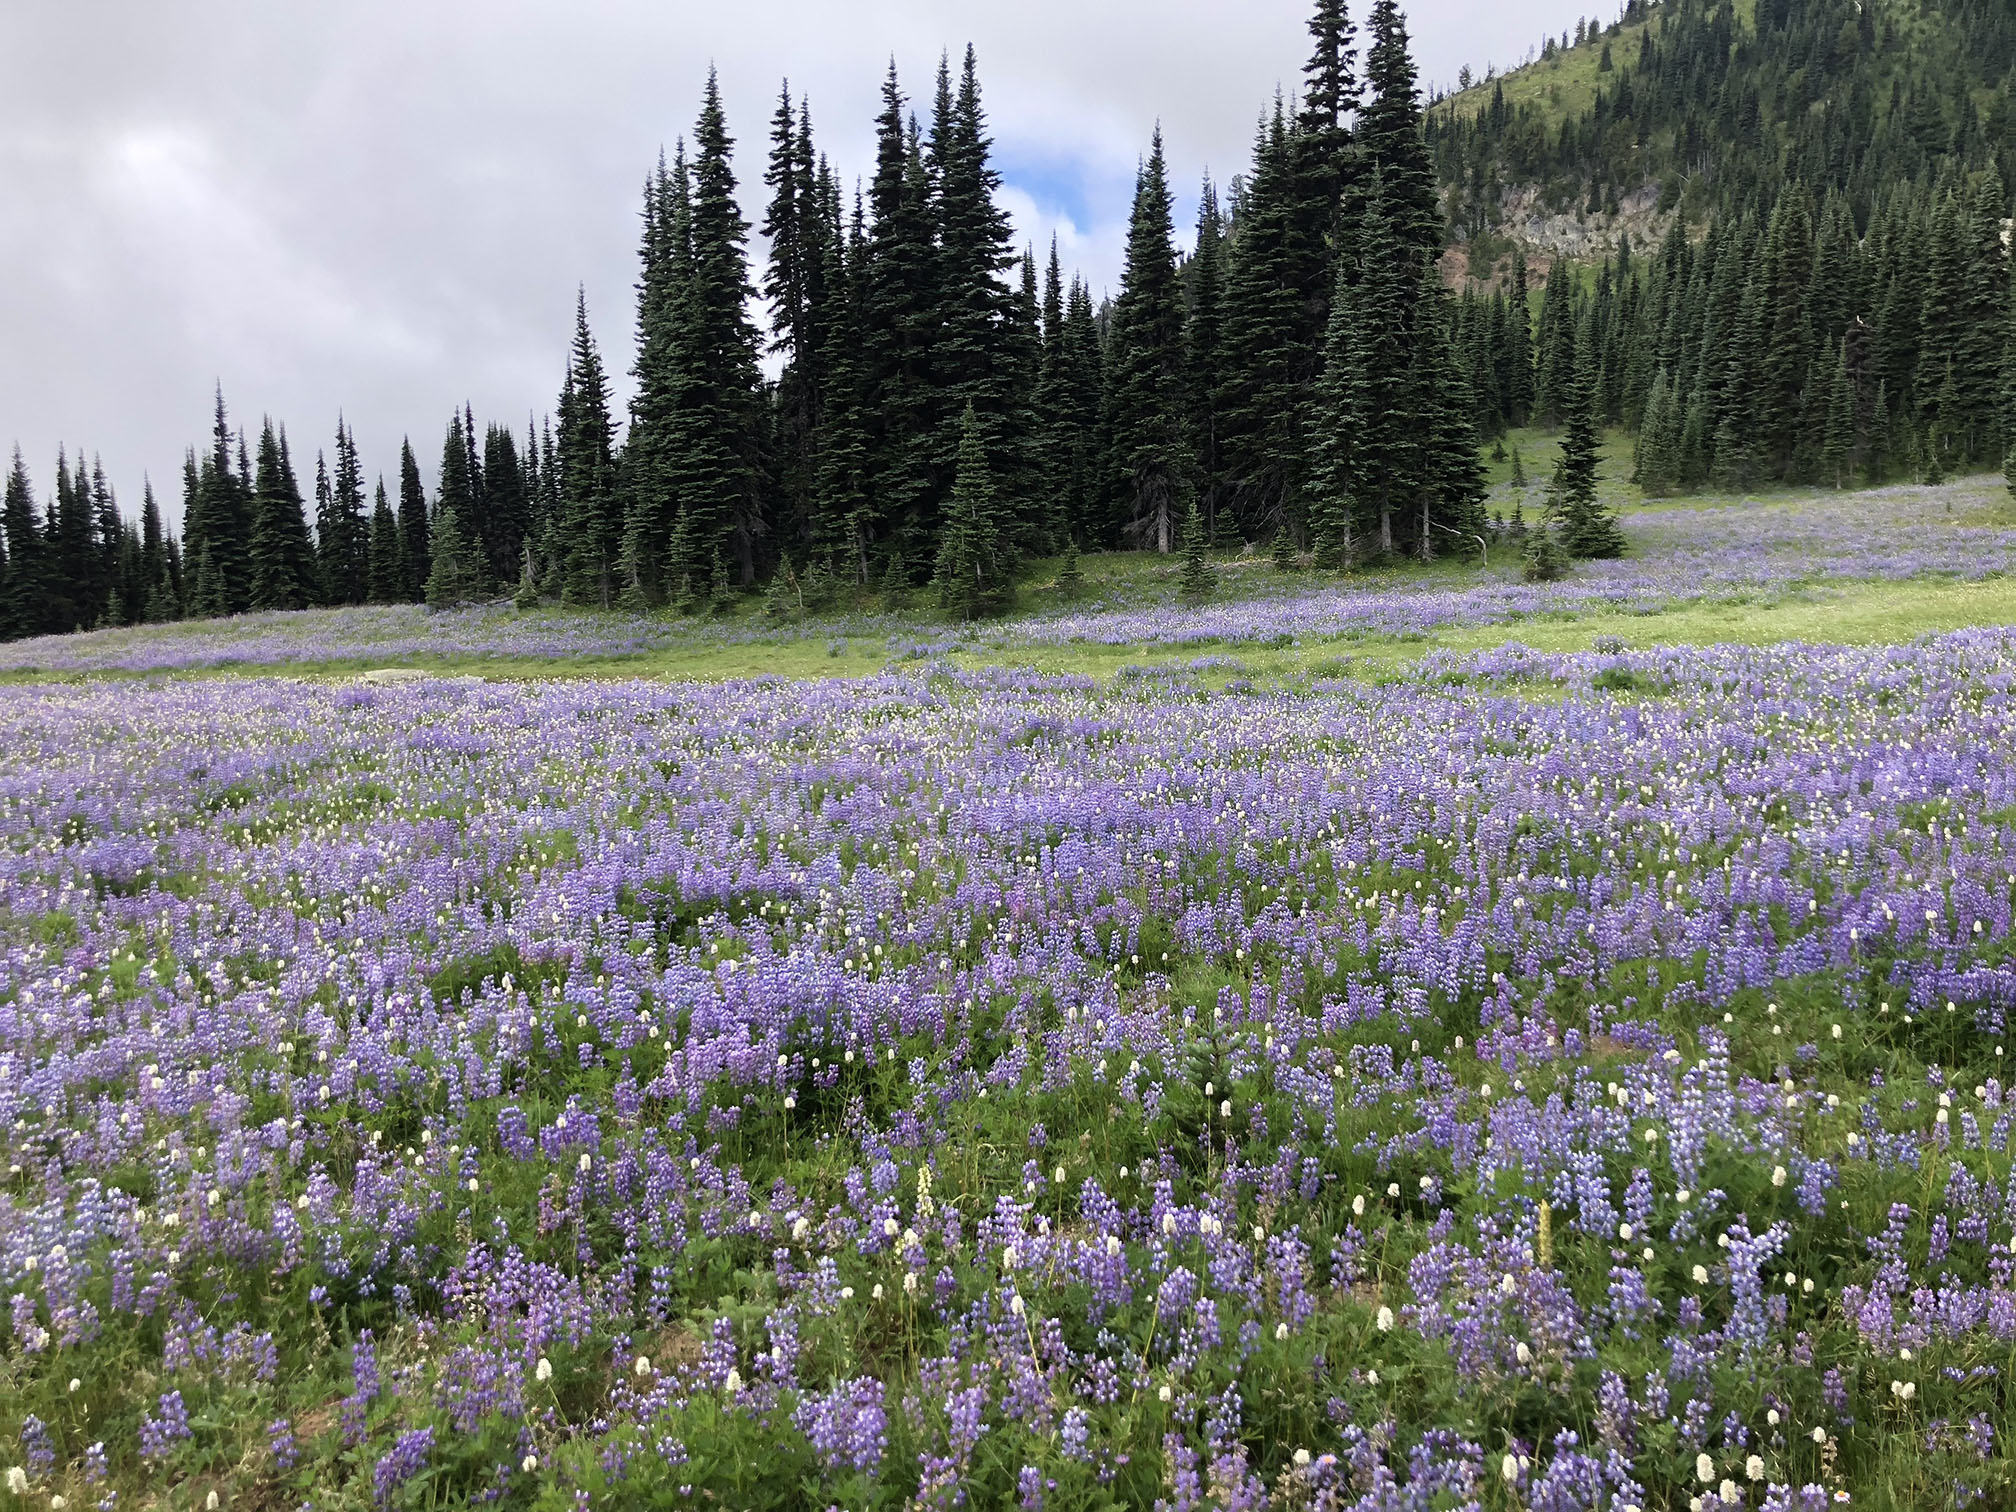 Located in Mt. Rainier National Park, this hike has 7+ lakes and a sea of wildflowers.